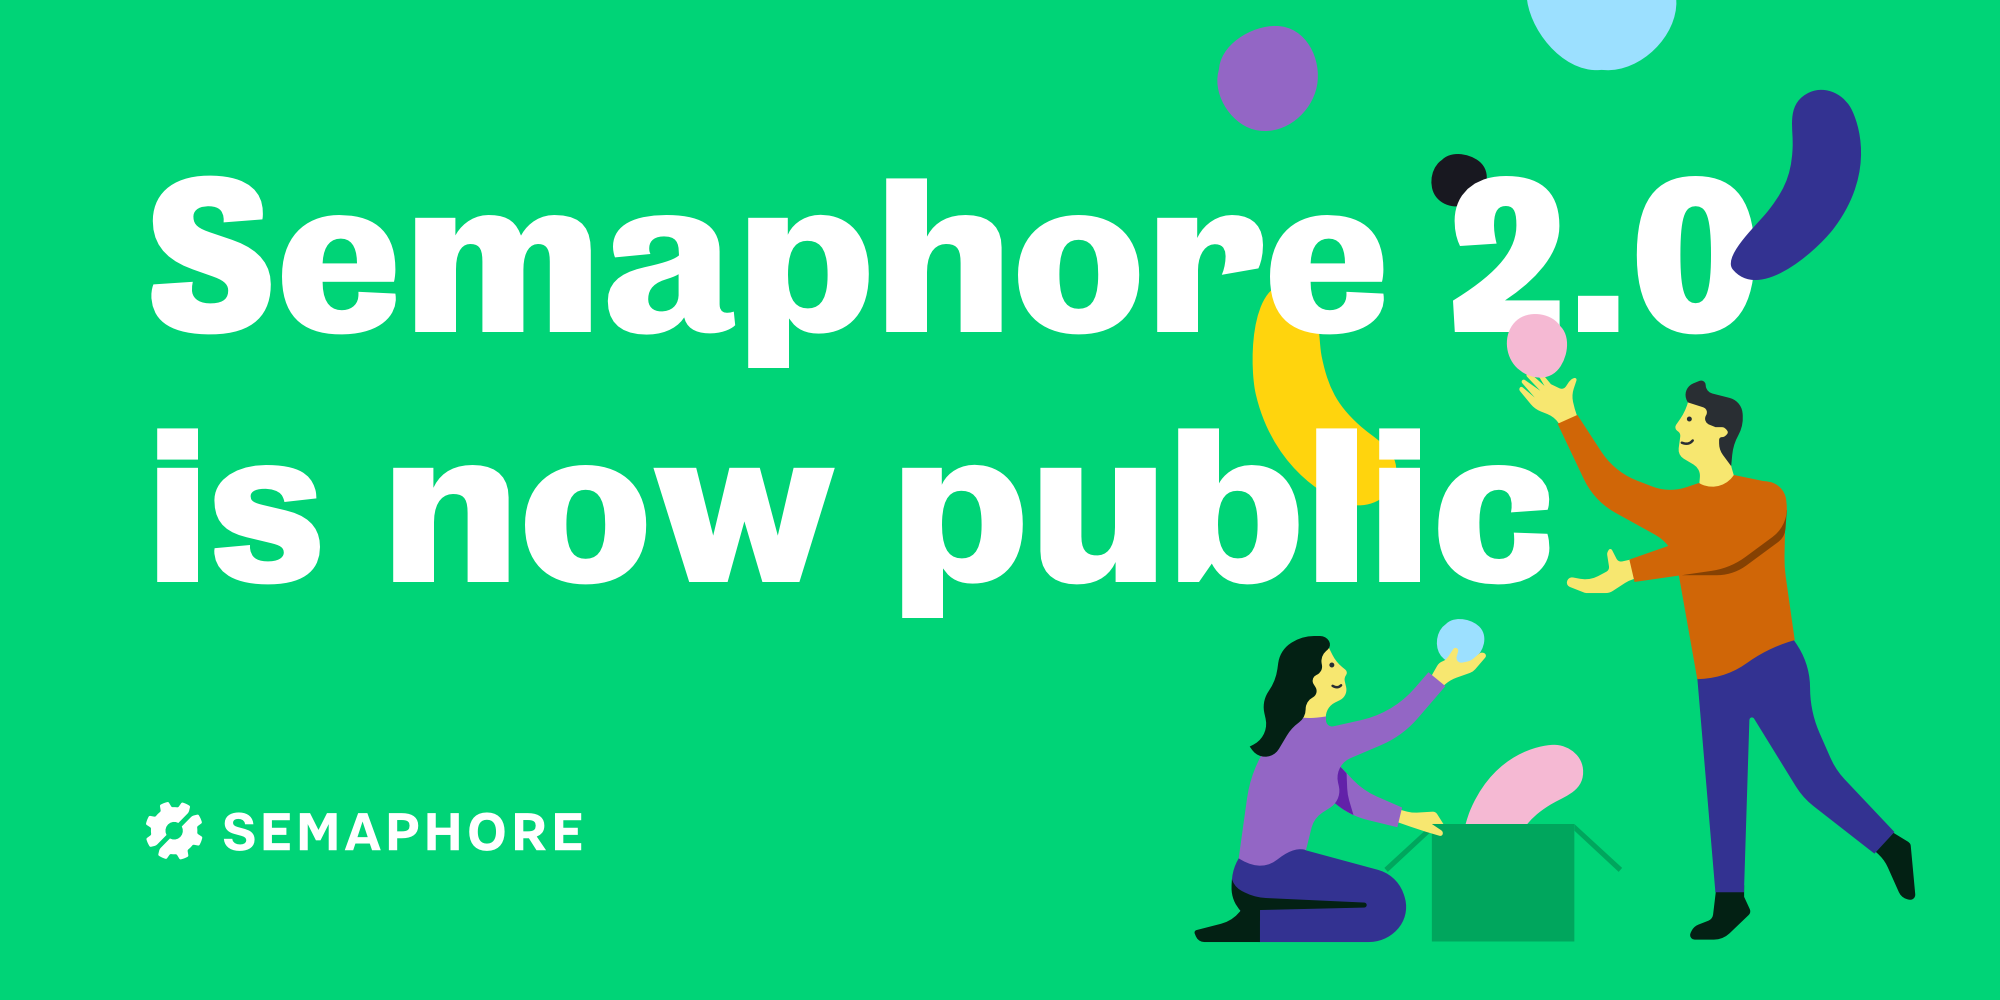 Semaphore 2.0 launched